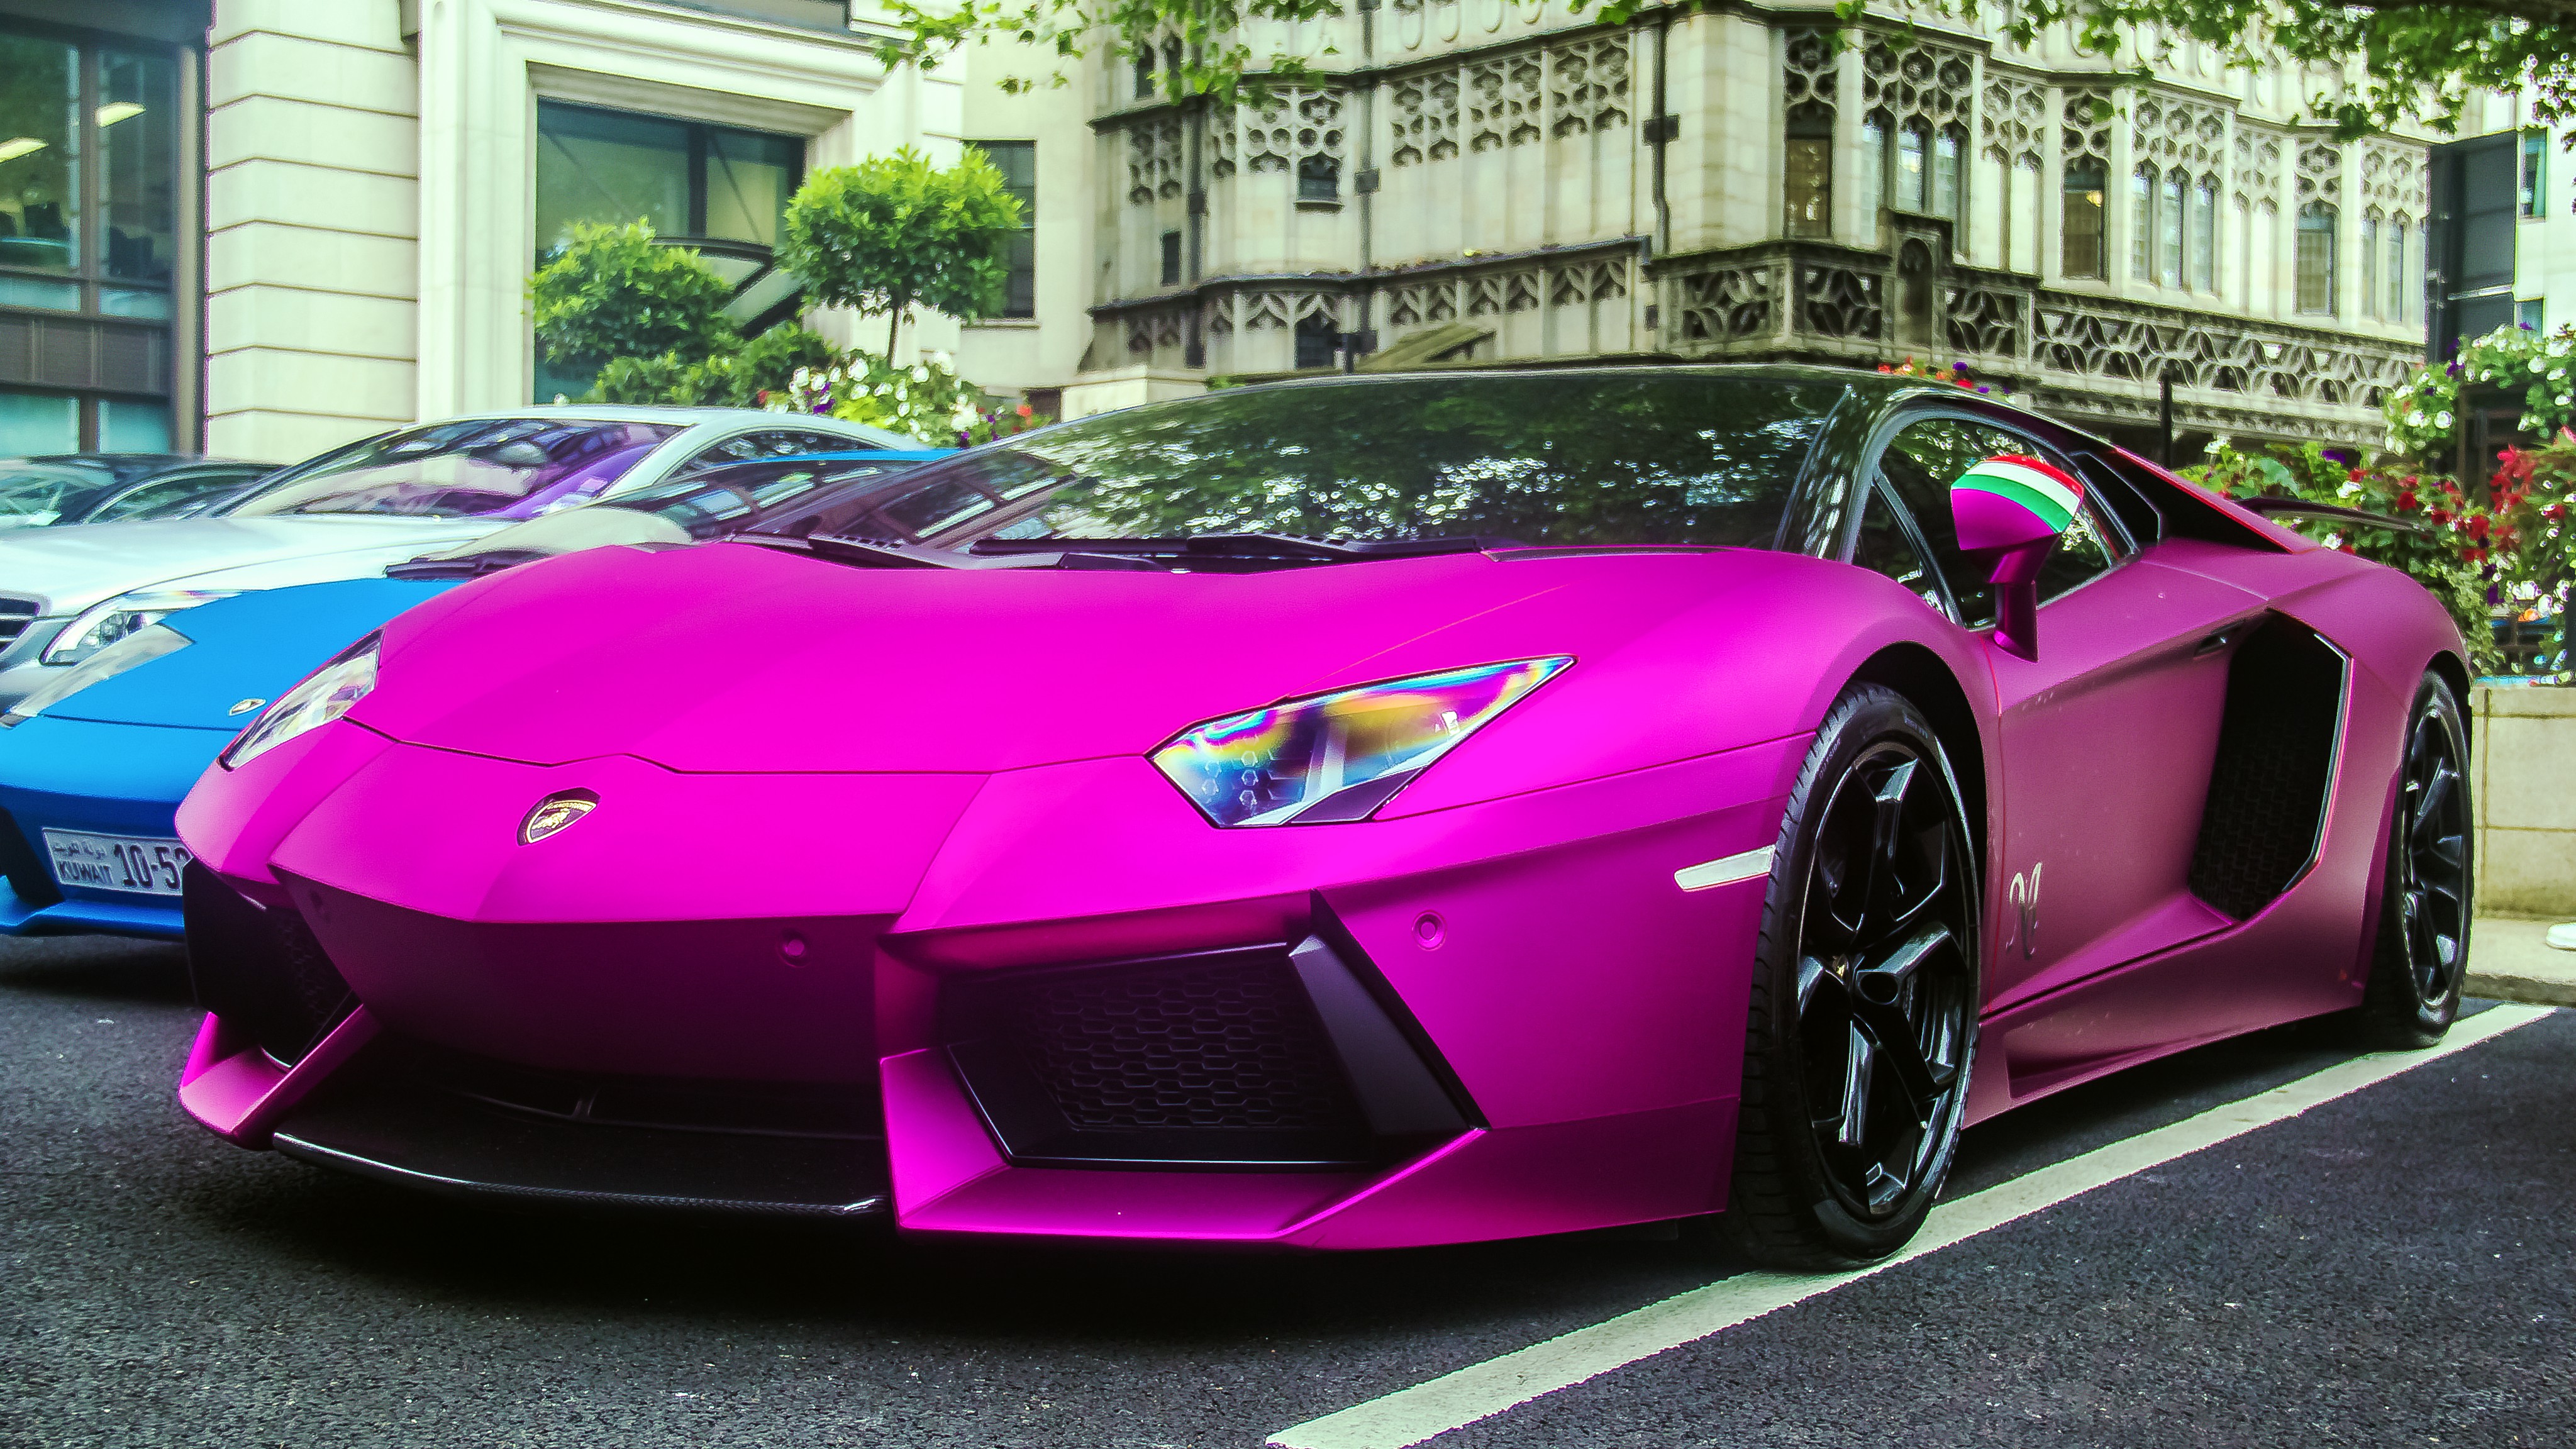 Lamborghini Aventador Pictures On HD Wallpaper Only Model